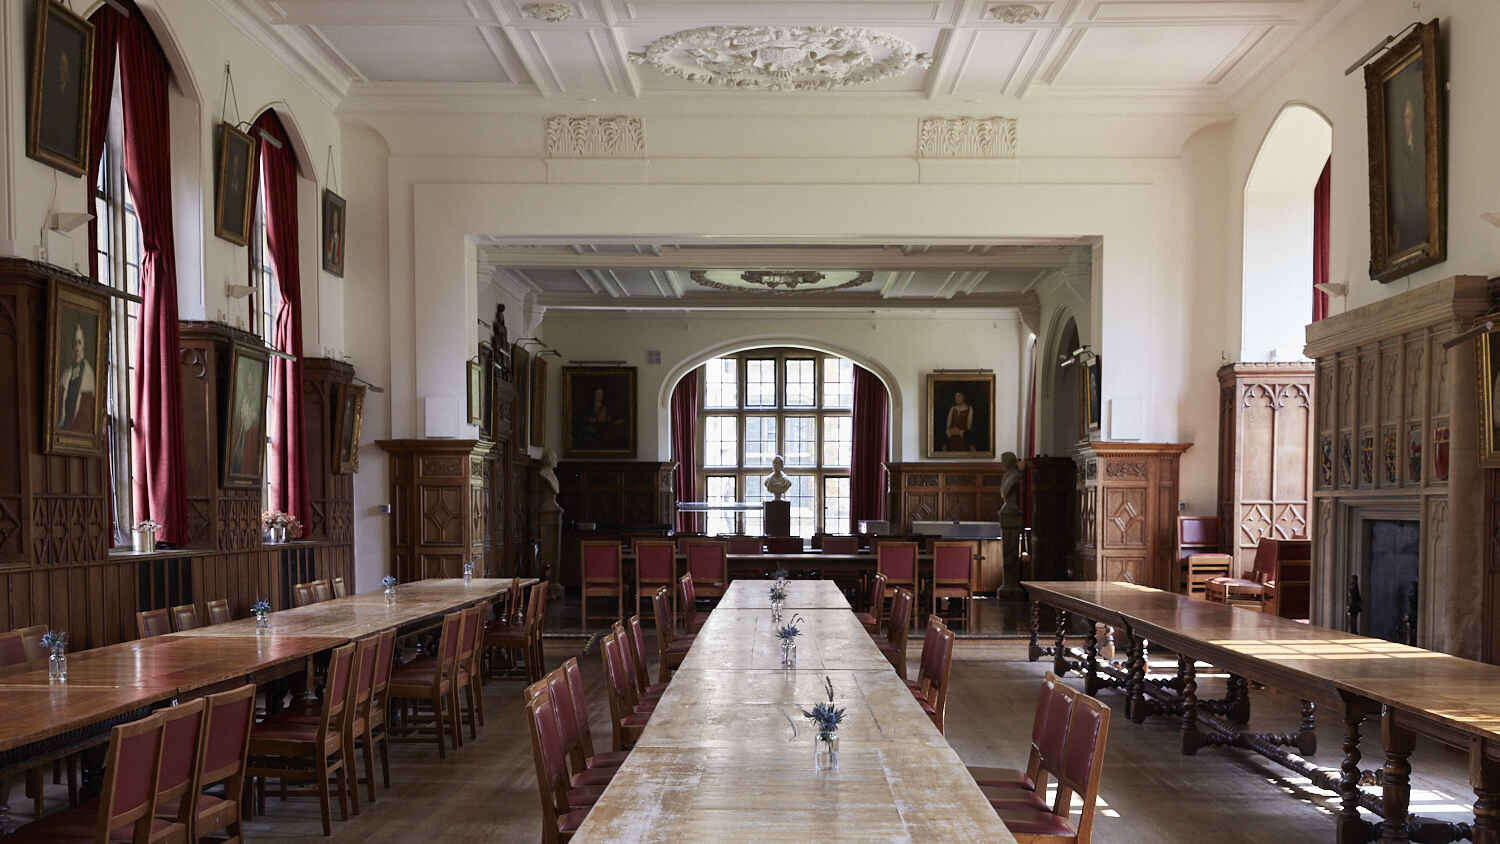 The dining hall in Pembroke College serves as a cafeteria for students and fellows and is also used for banquets.